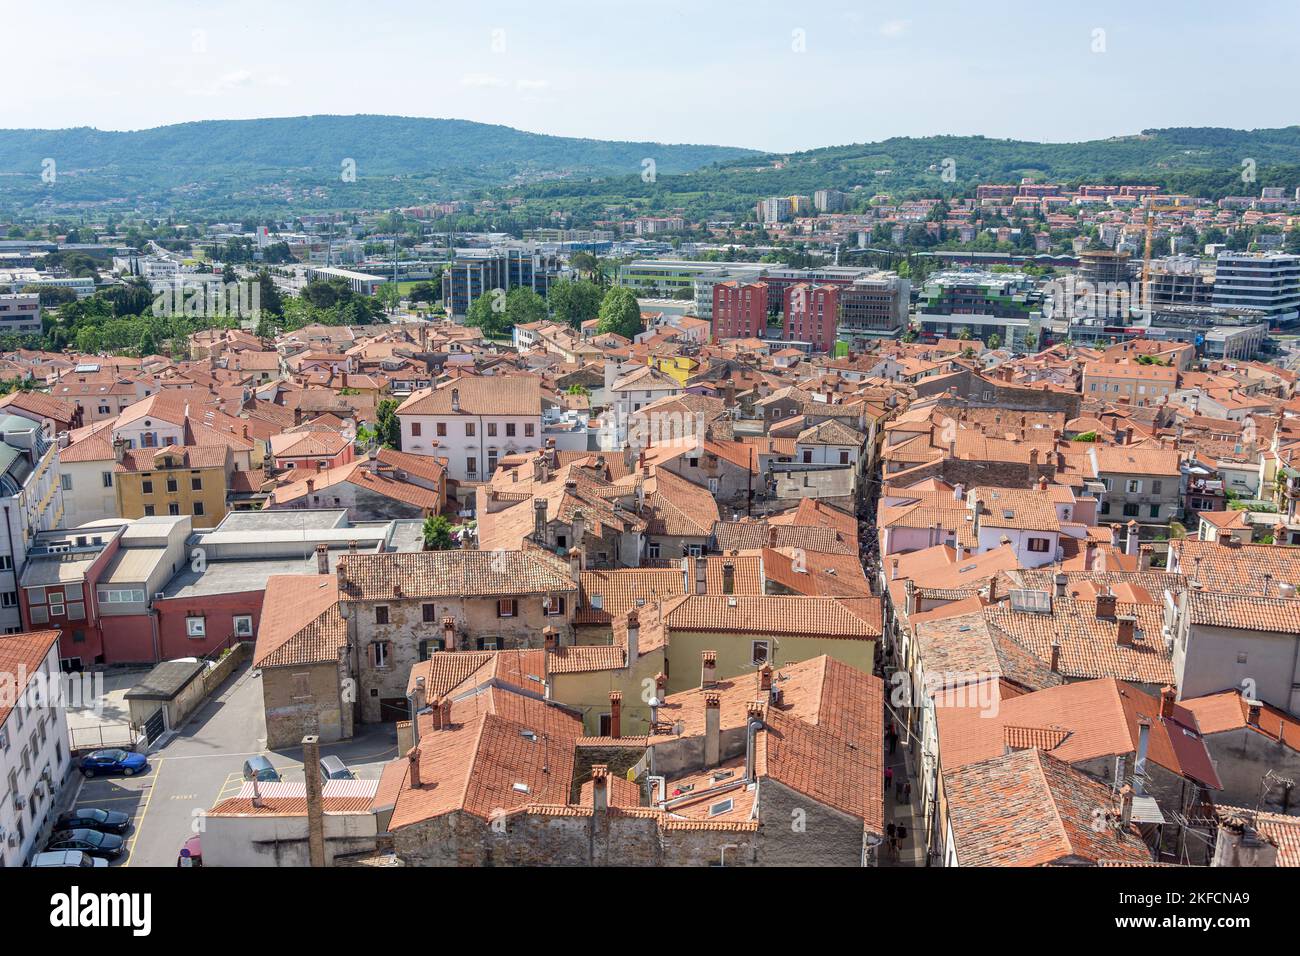 Old and New Town view from Cathedral of the Assumption tower, Titov trg, Koper, Slovene Istria, Slovenia Stock Photo